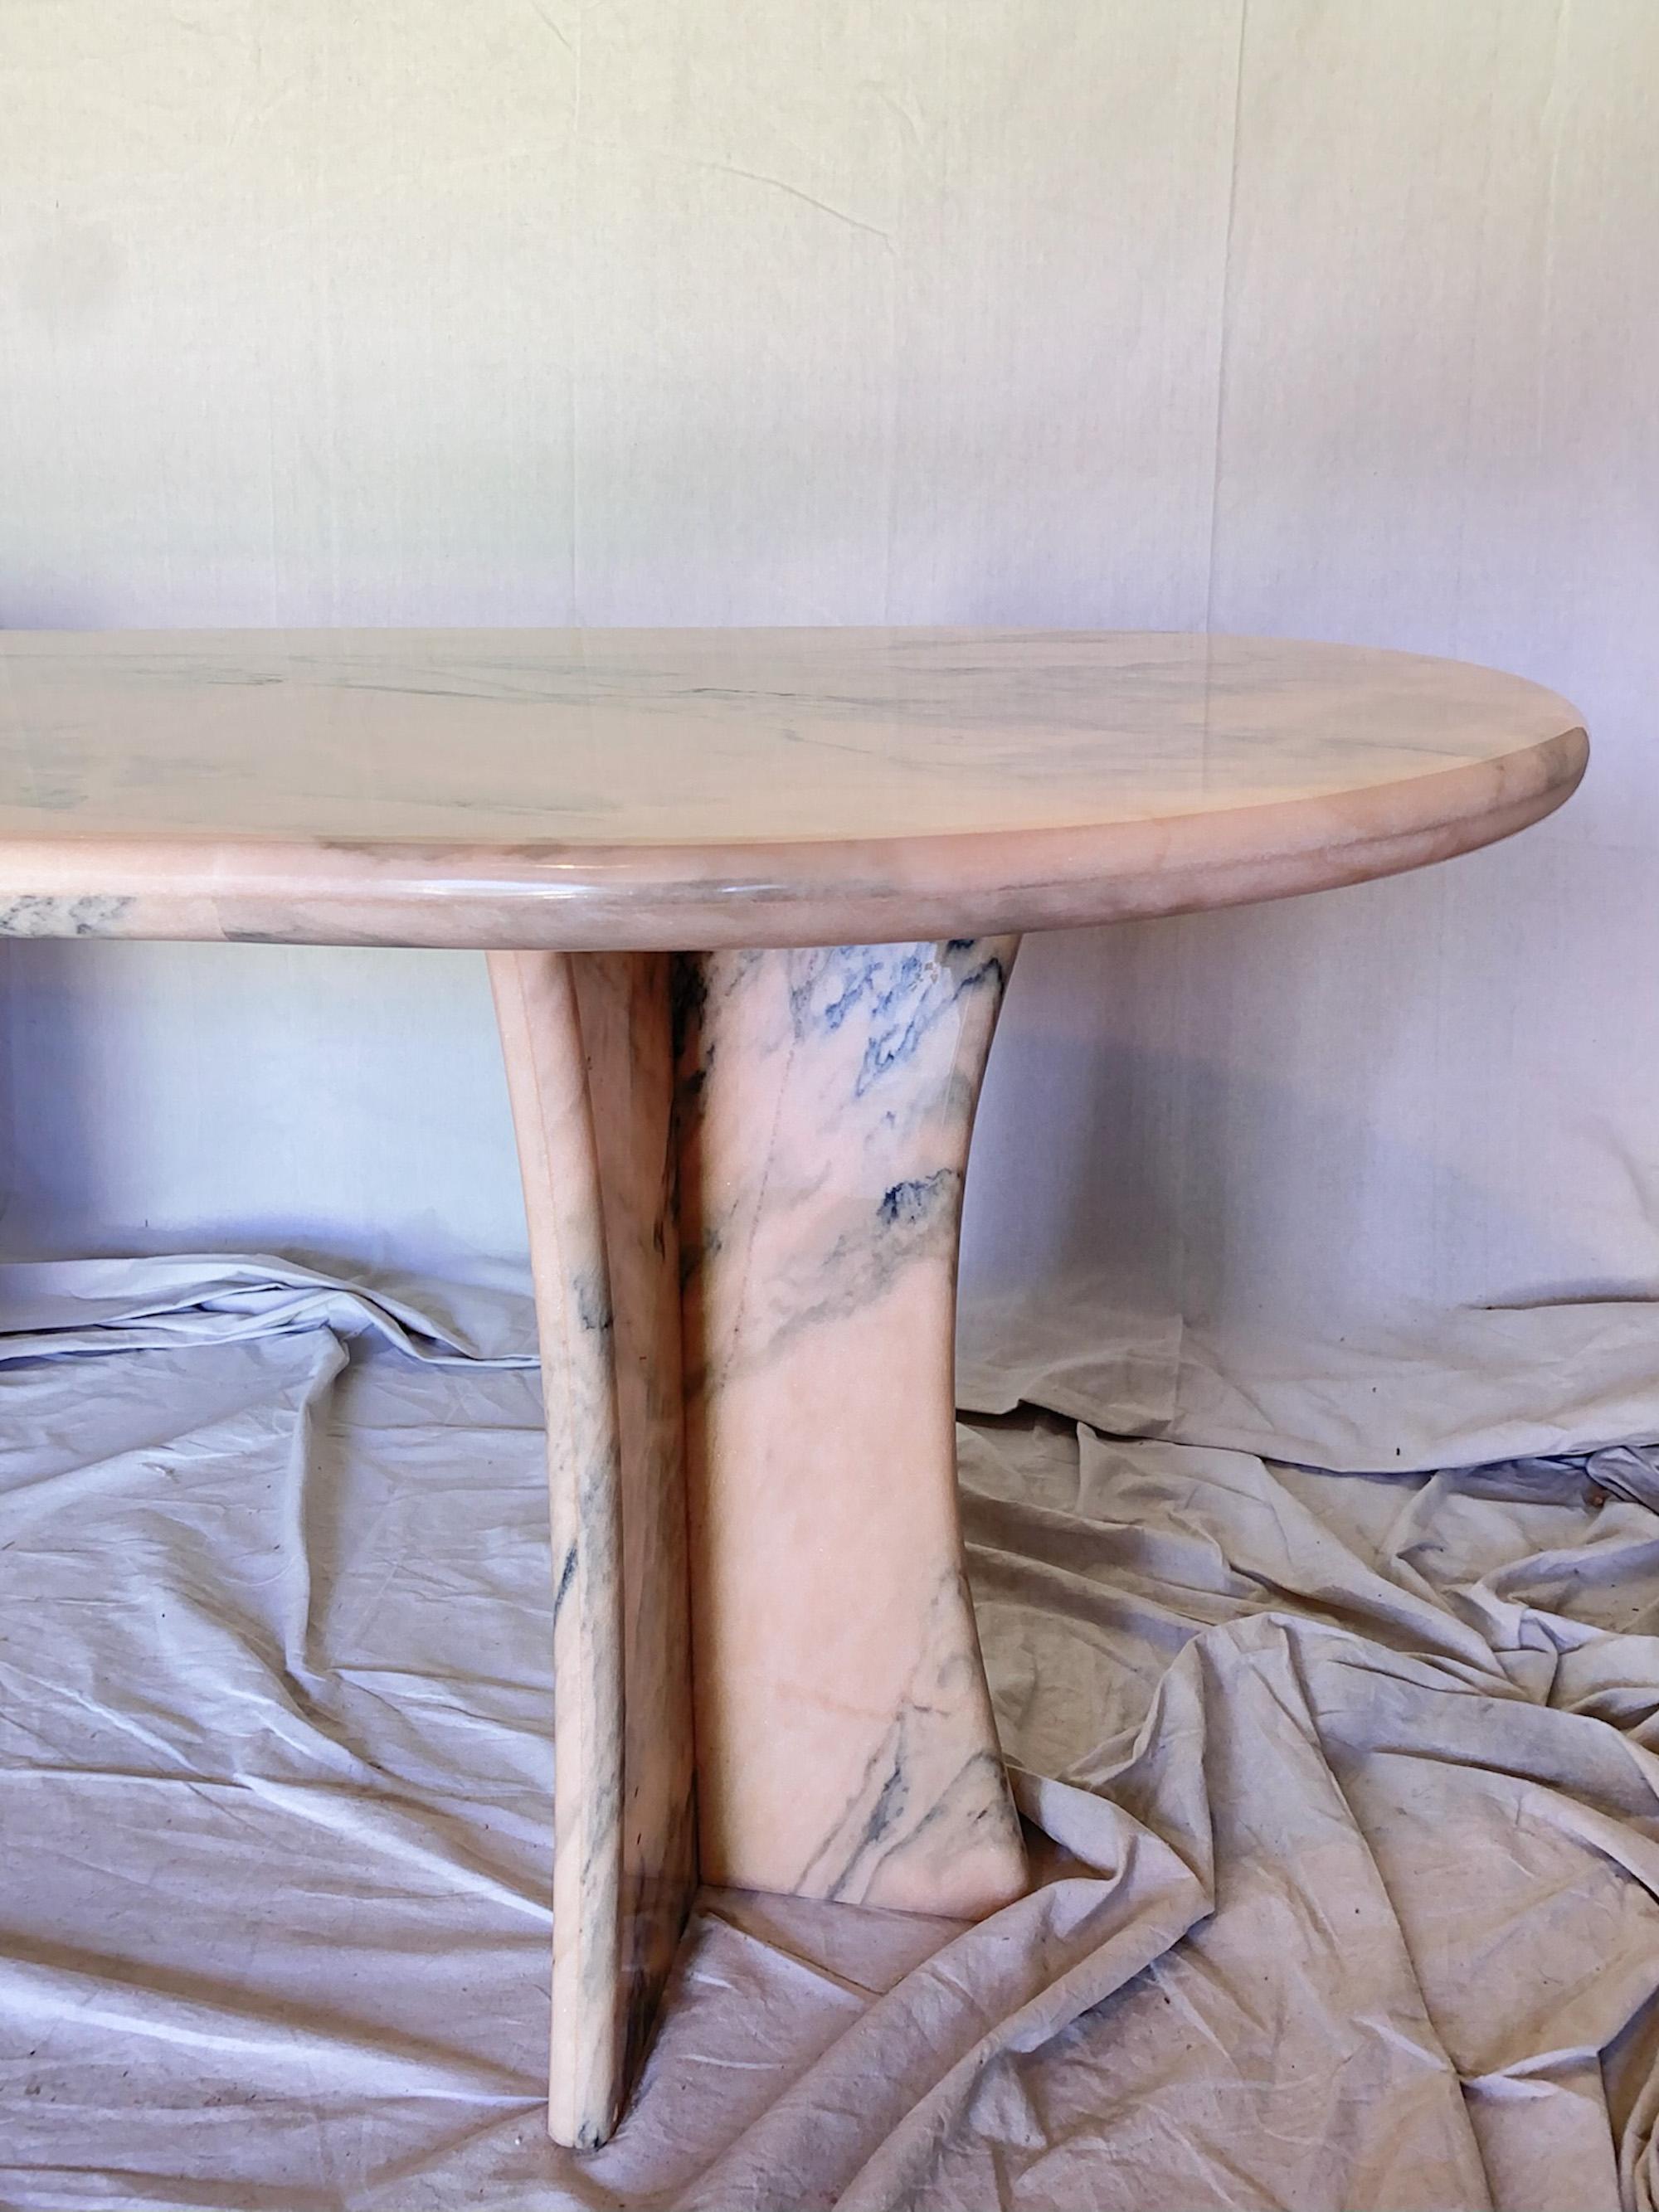 Gorgeous 1960s Portuguese Rosa marble dining table imported from Spain and made in Portugal. This statement piece has hues of pink and peach with beautiful blue-grey veining. The oval table top has 2